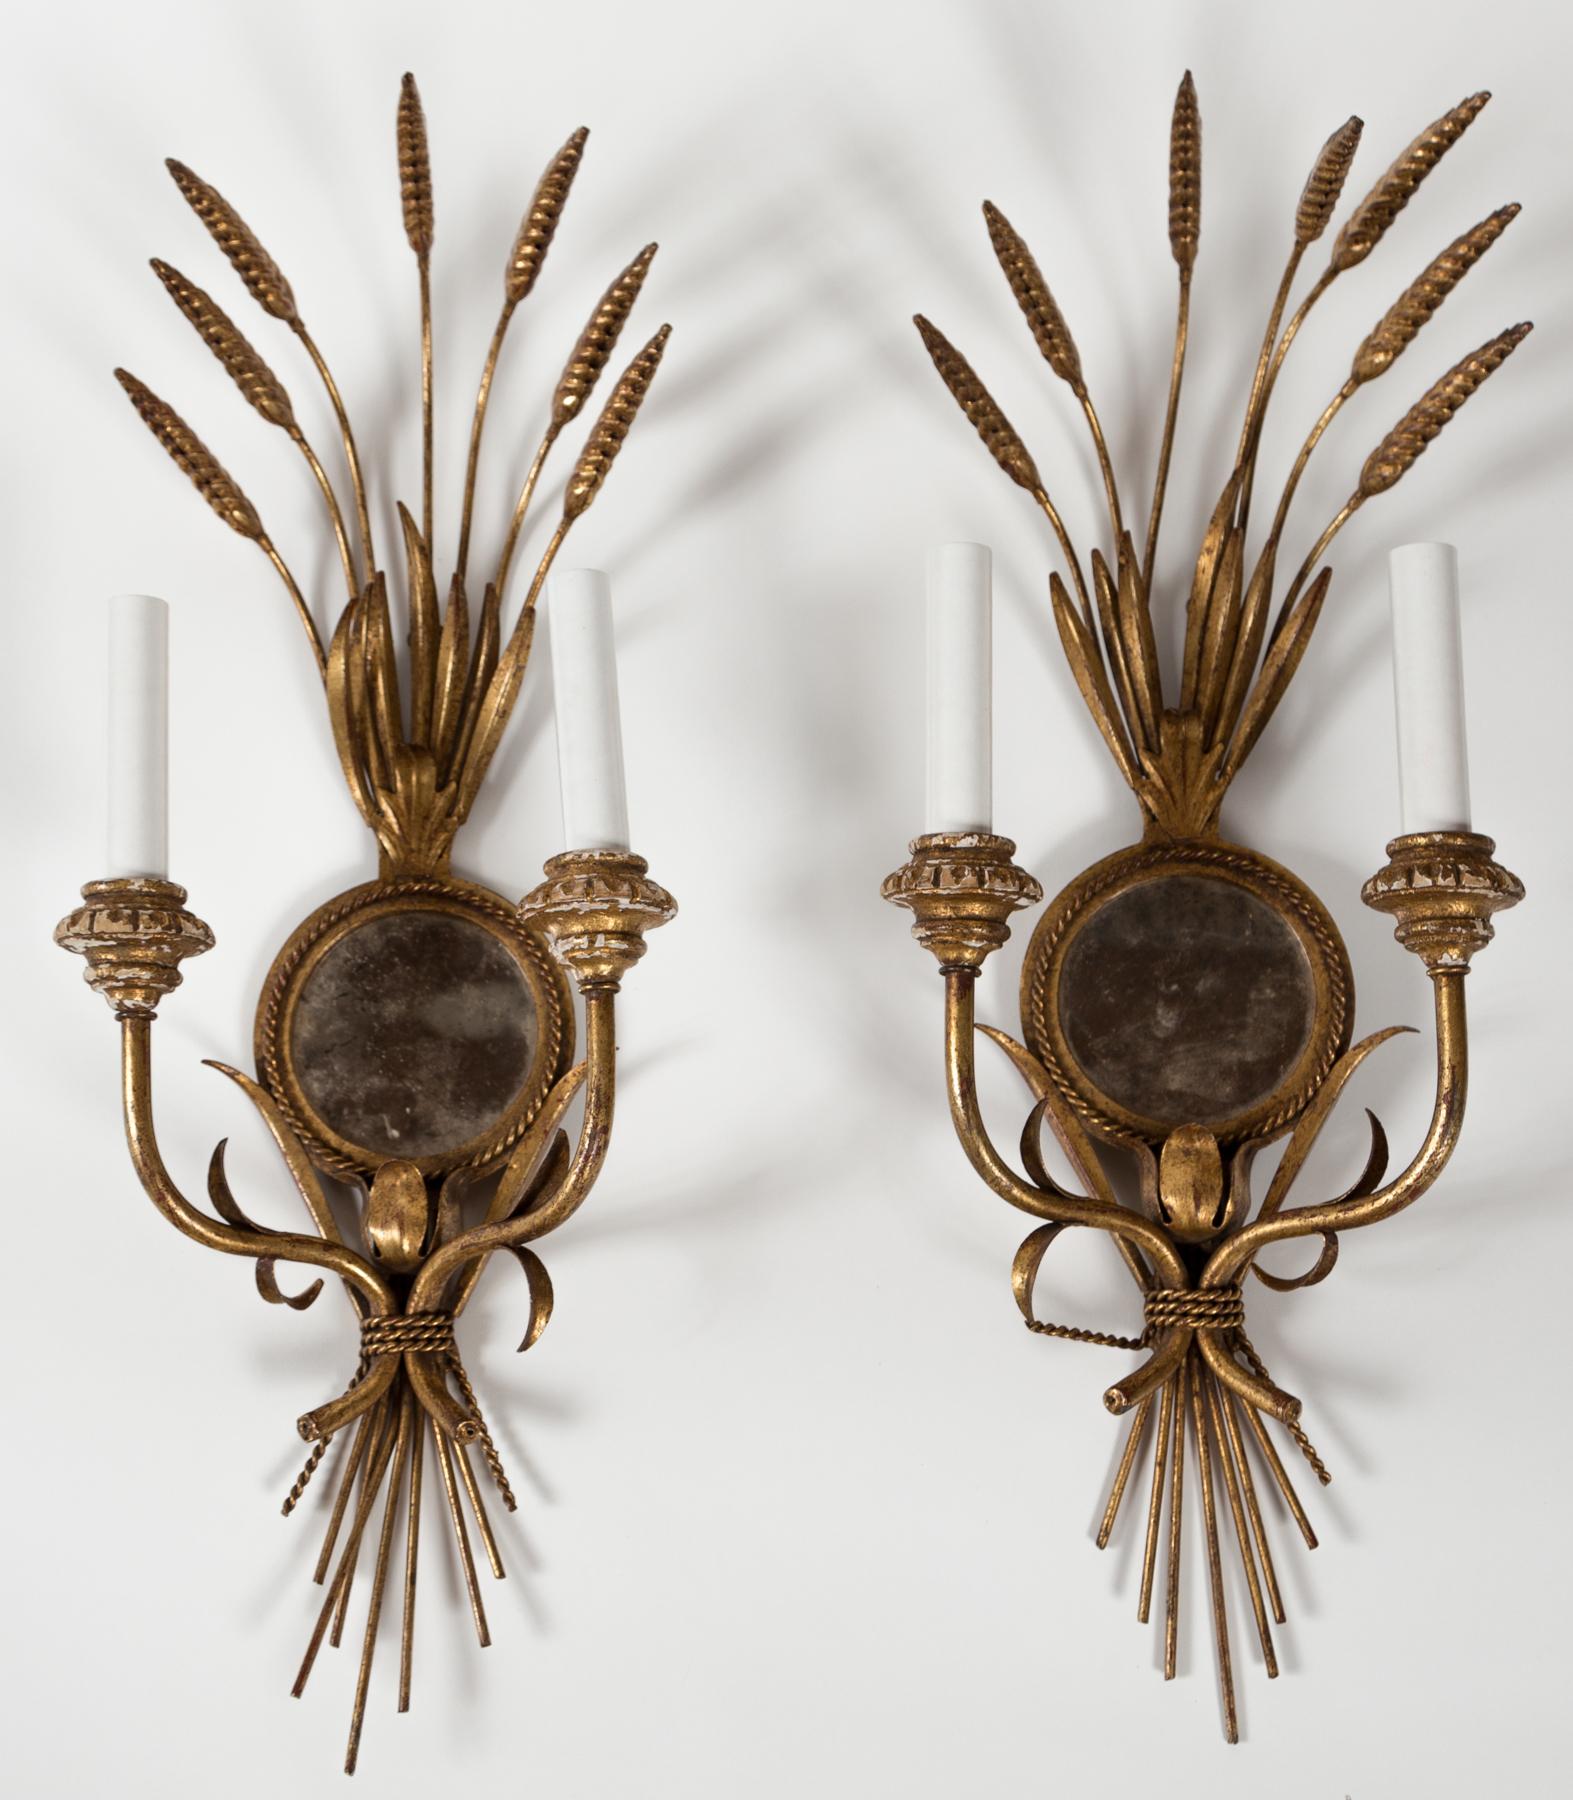 Pair Wheat Sheaf Mirrored Sconces, Italy, circa 1950's. Gilt metal with gilt wood details and antiqued glass mirrors. Double arms with new sleeves.